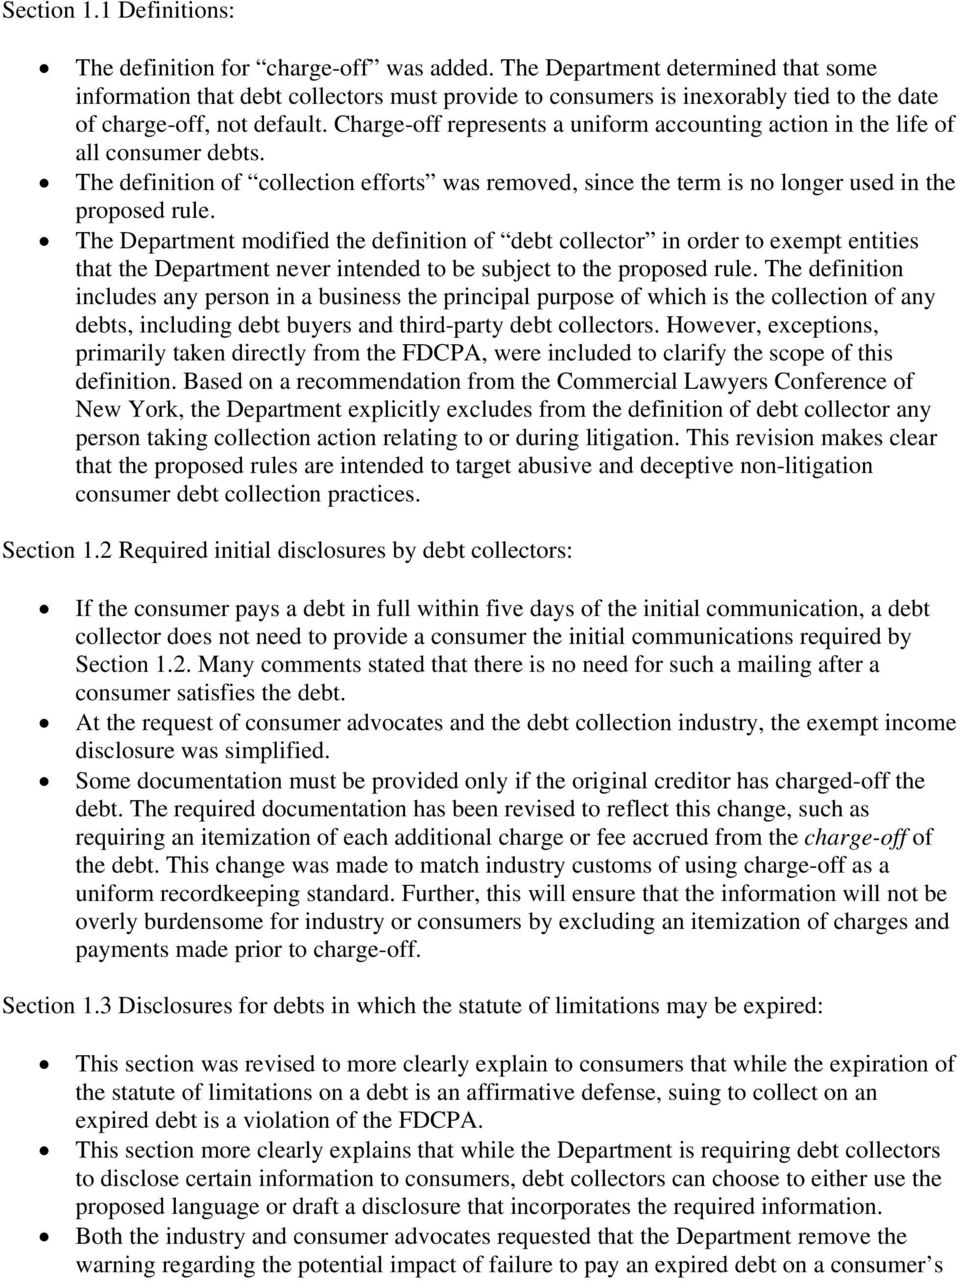 summary of the revised debt collection by third-party debt